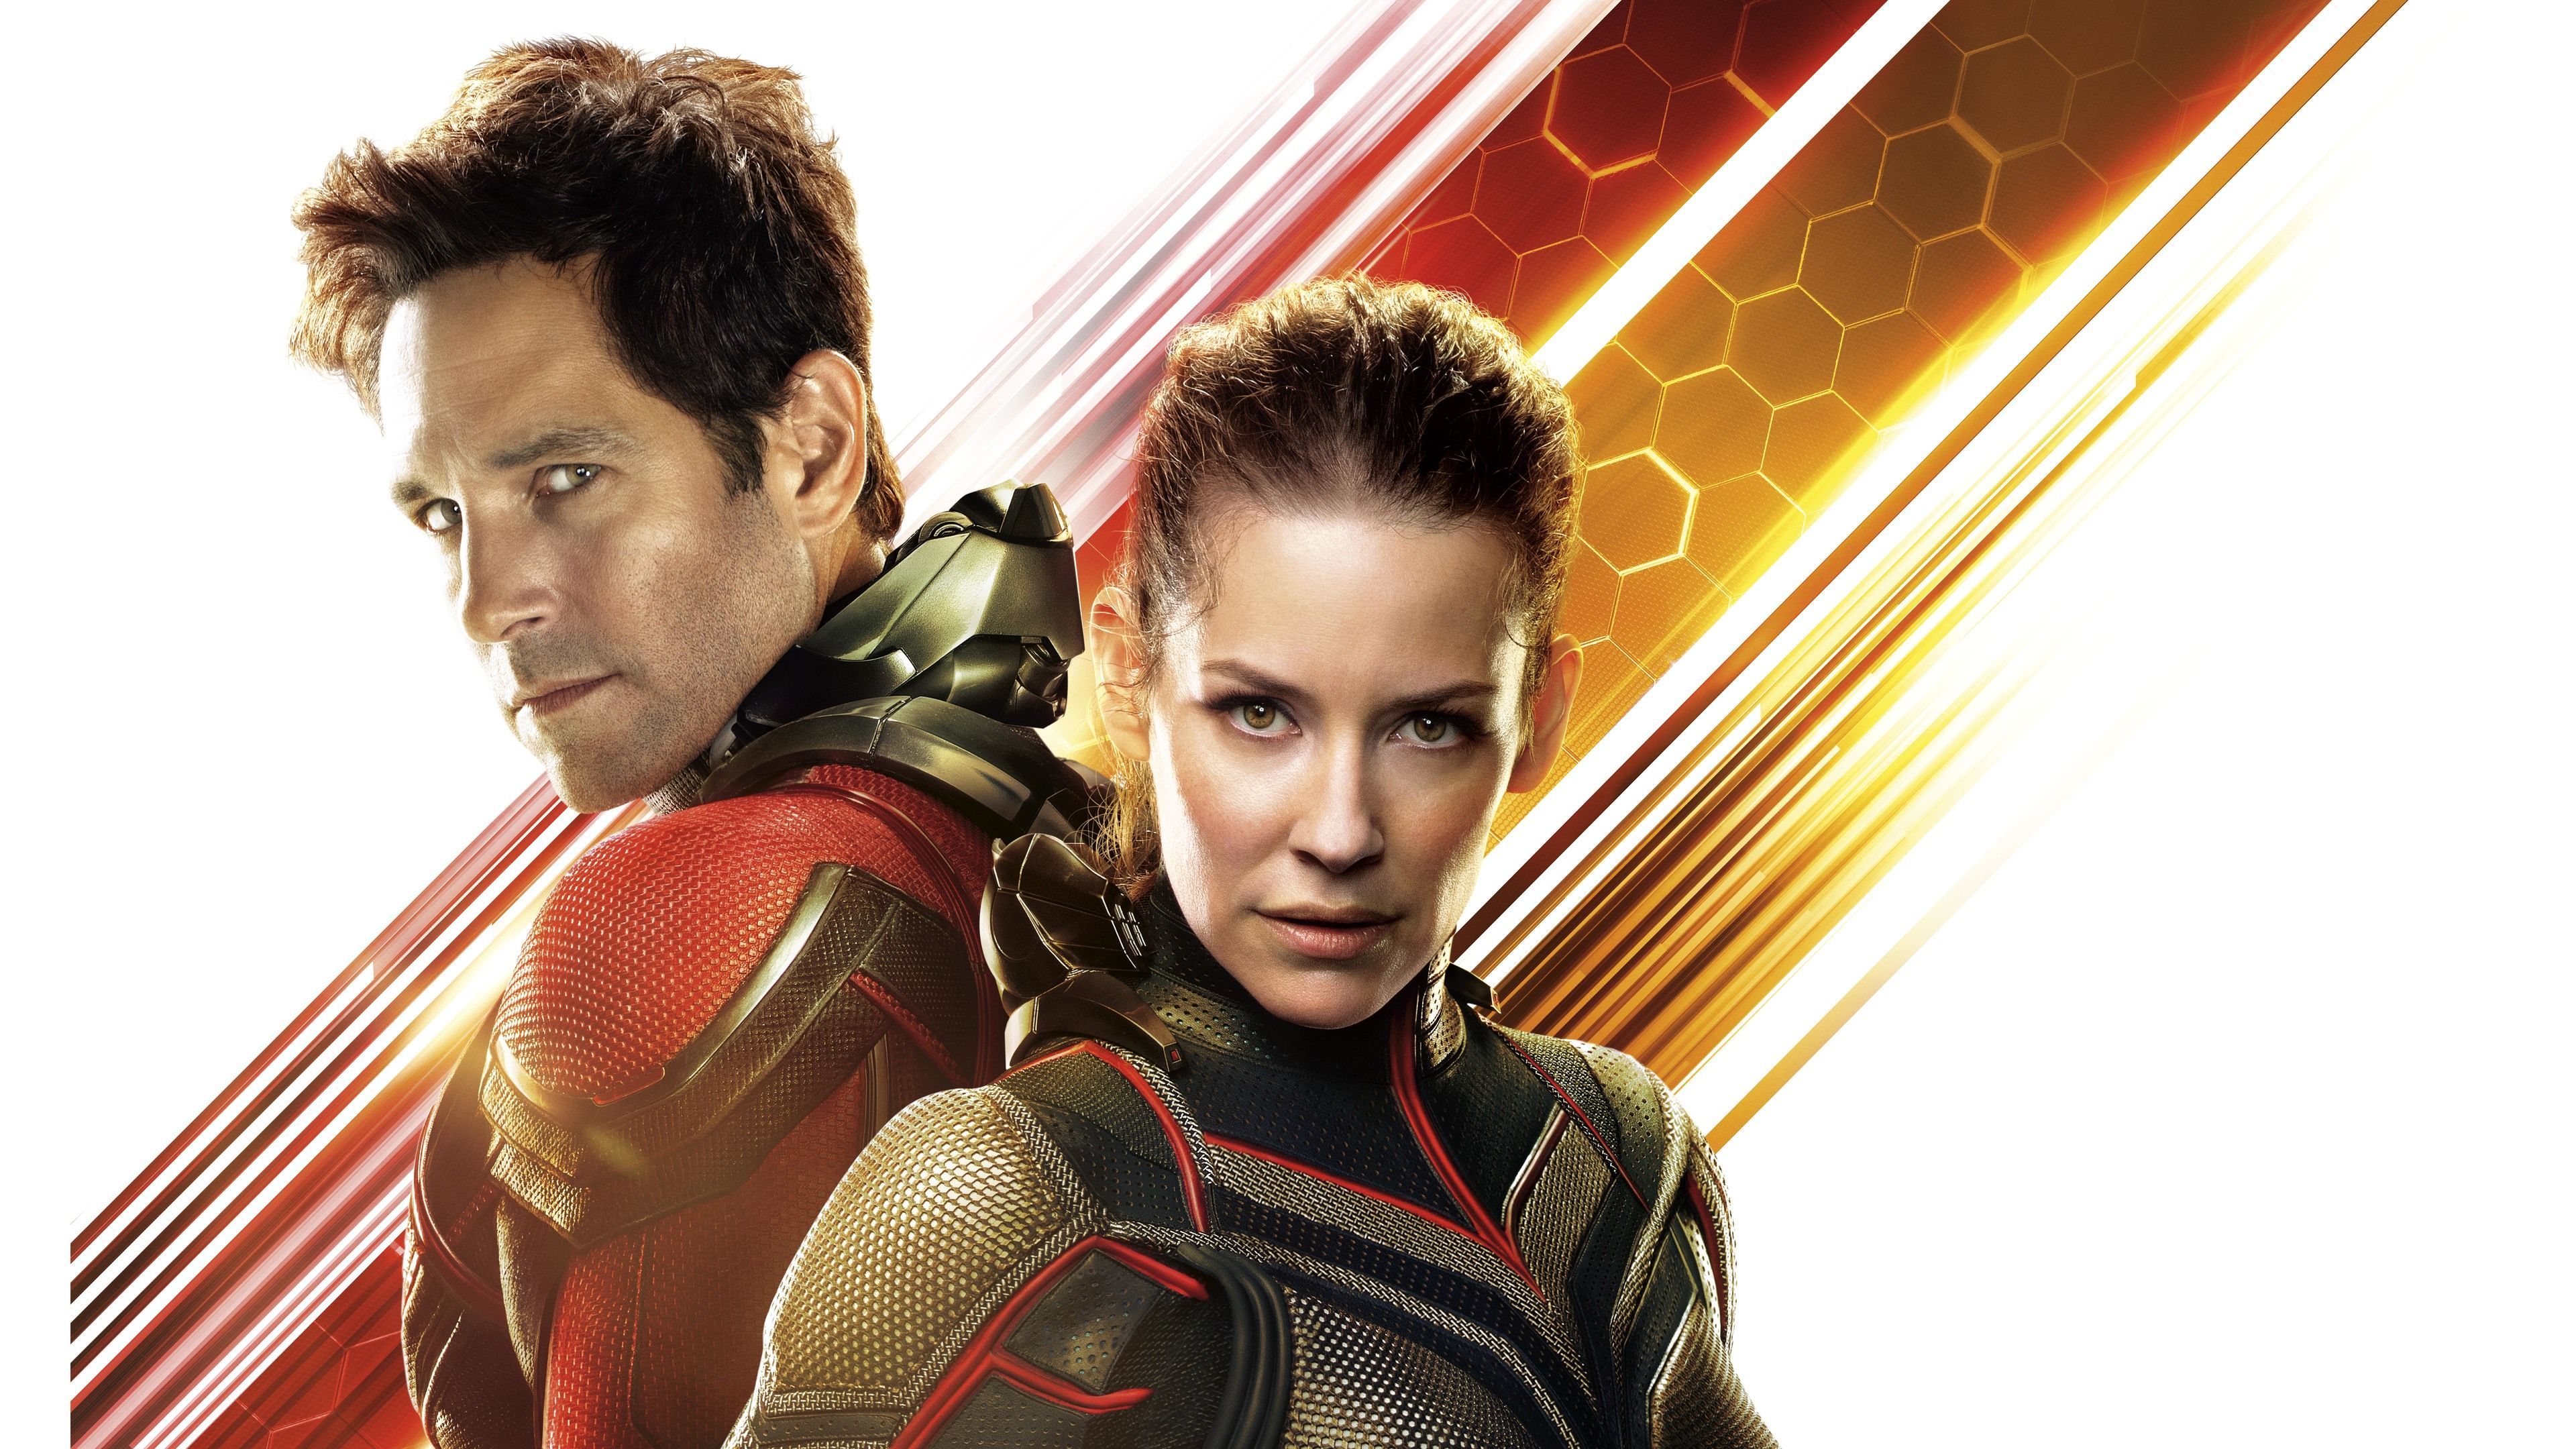 Ant Man And The Wasp Movie 4k Movies Wallpaper, Hd Wallpaper, Ant Man Wallpaper, Ant Man And The Wasp Wallpaper, 8k Wallpaper, 5. Wasp Movie, Ant Man, Marvel